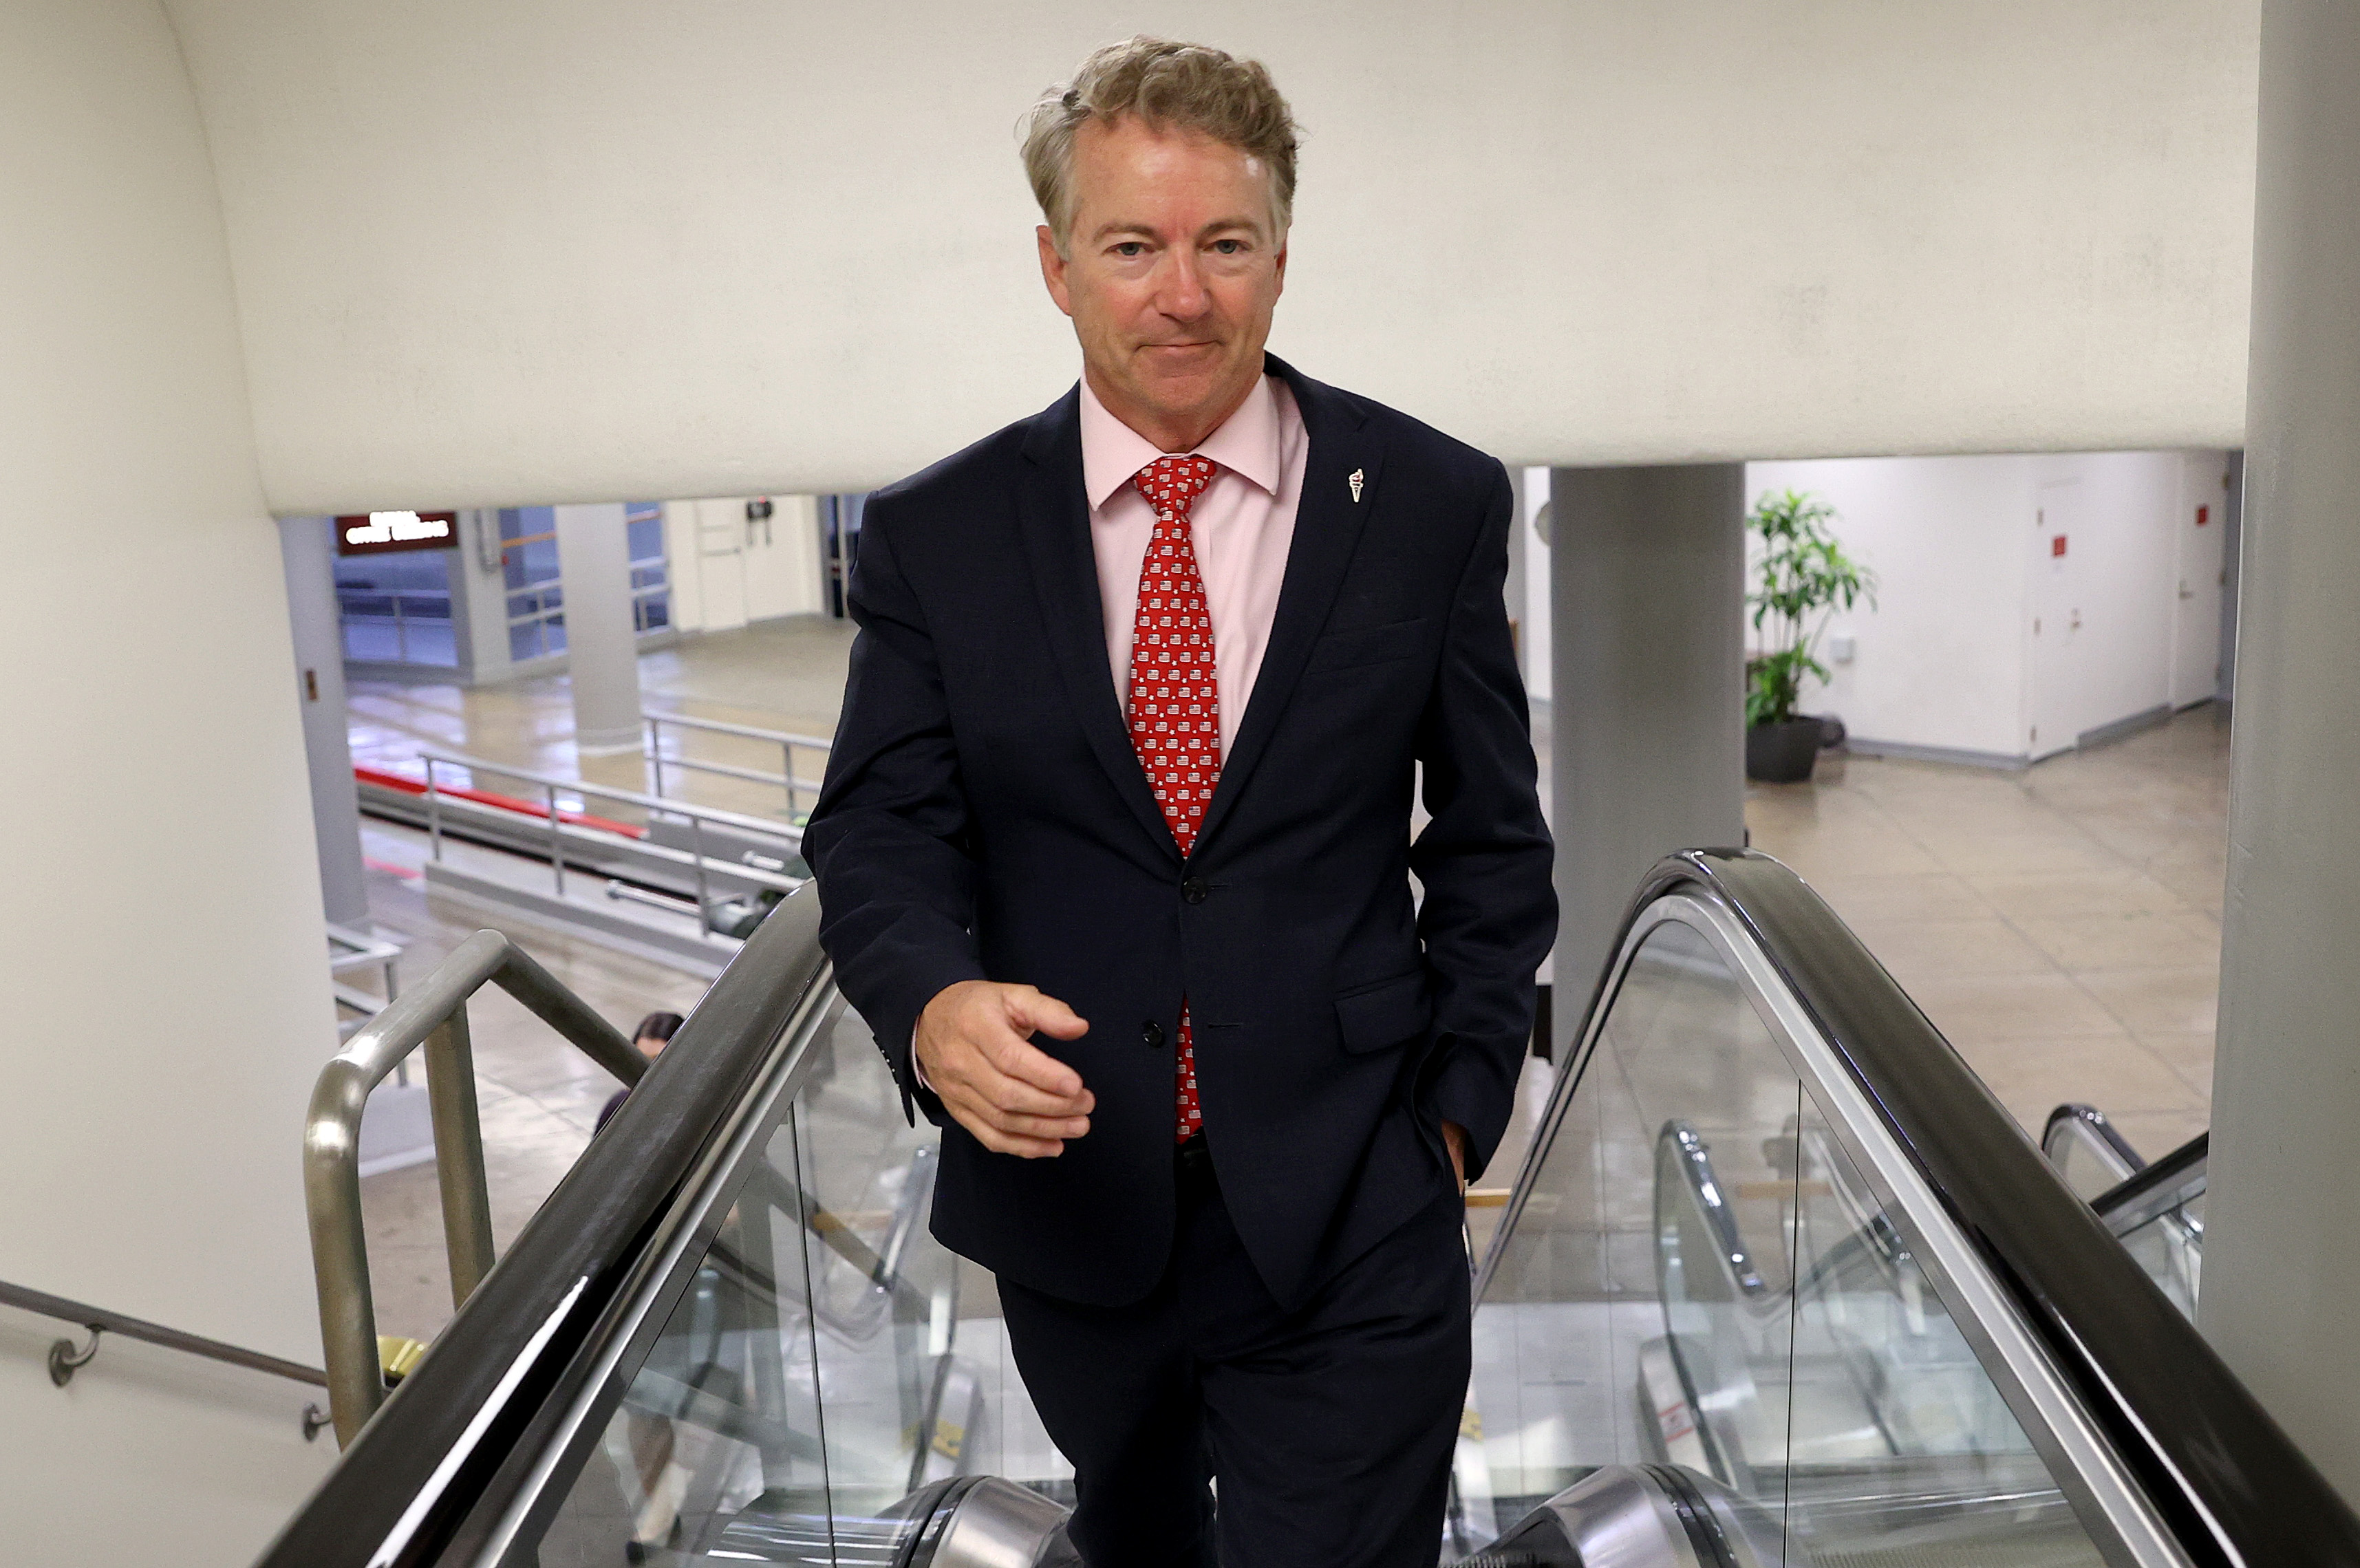 Sen. Rand Paul, (R-KY), arrives at the U.S. Capitol for a vote on March 18, 2020, four days before announcing he had tested positive for the coronavirus. (Win McNamee—Getty Images)